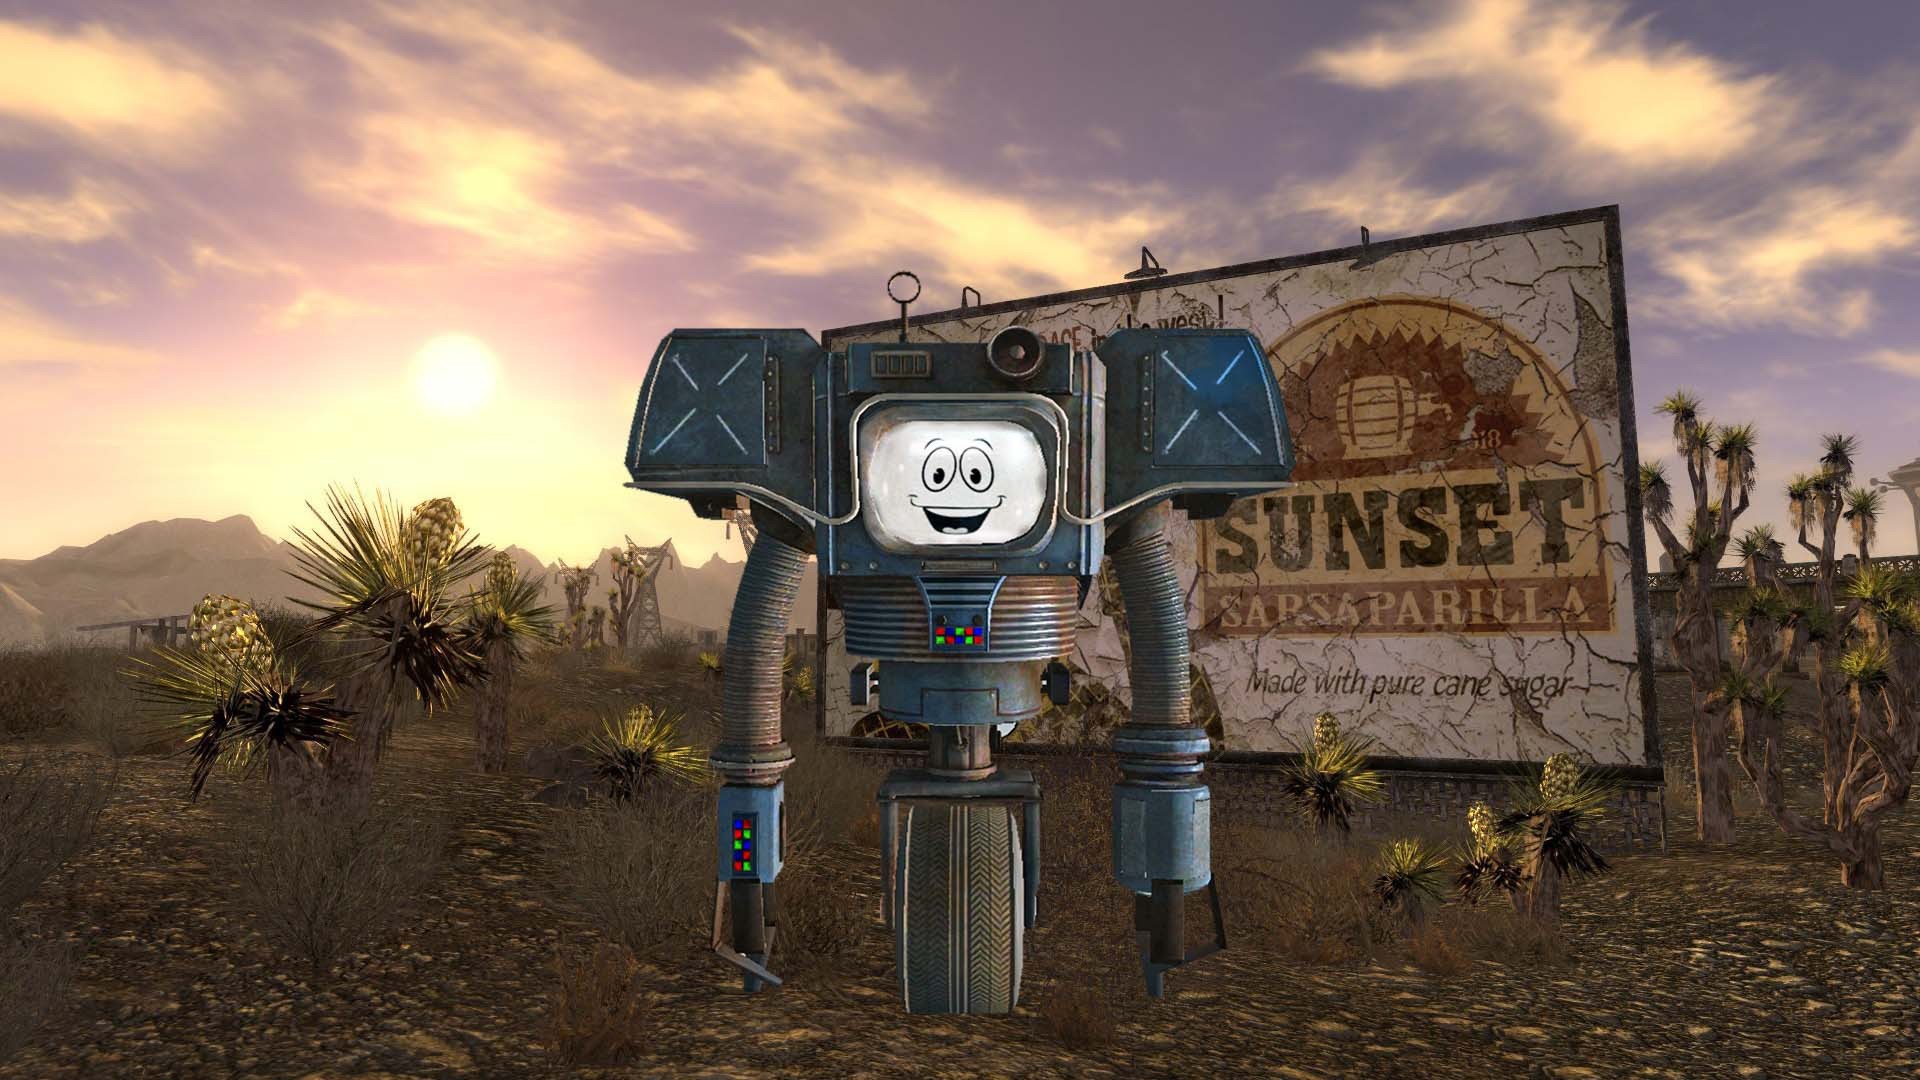 The robot from the game Fallout New Desktop wallpapers 1920x1080